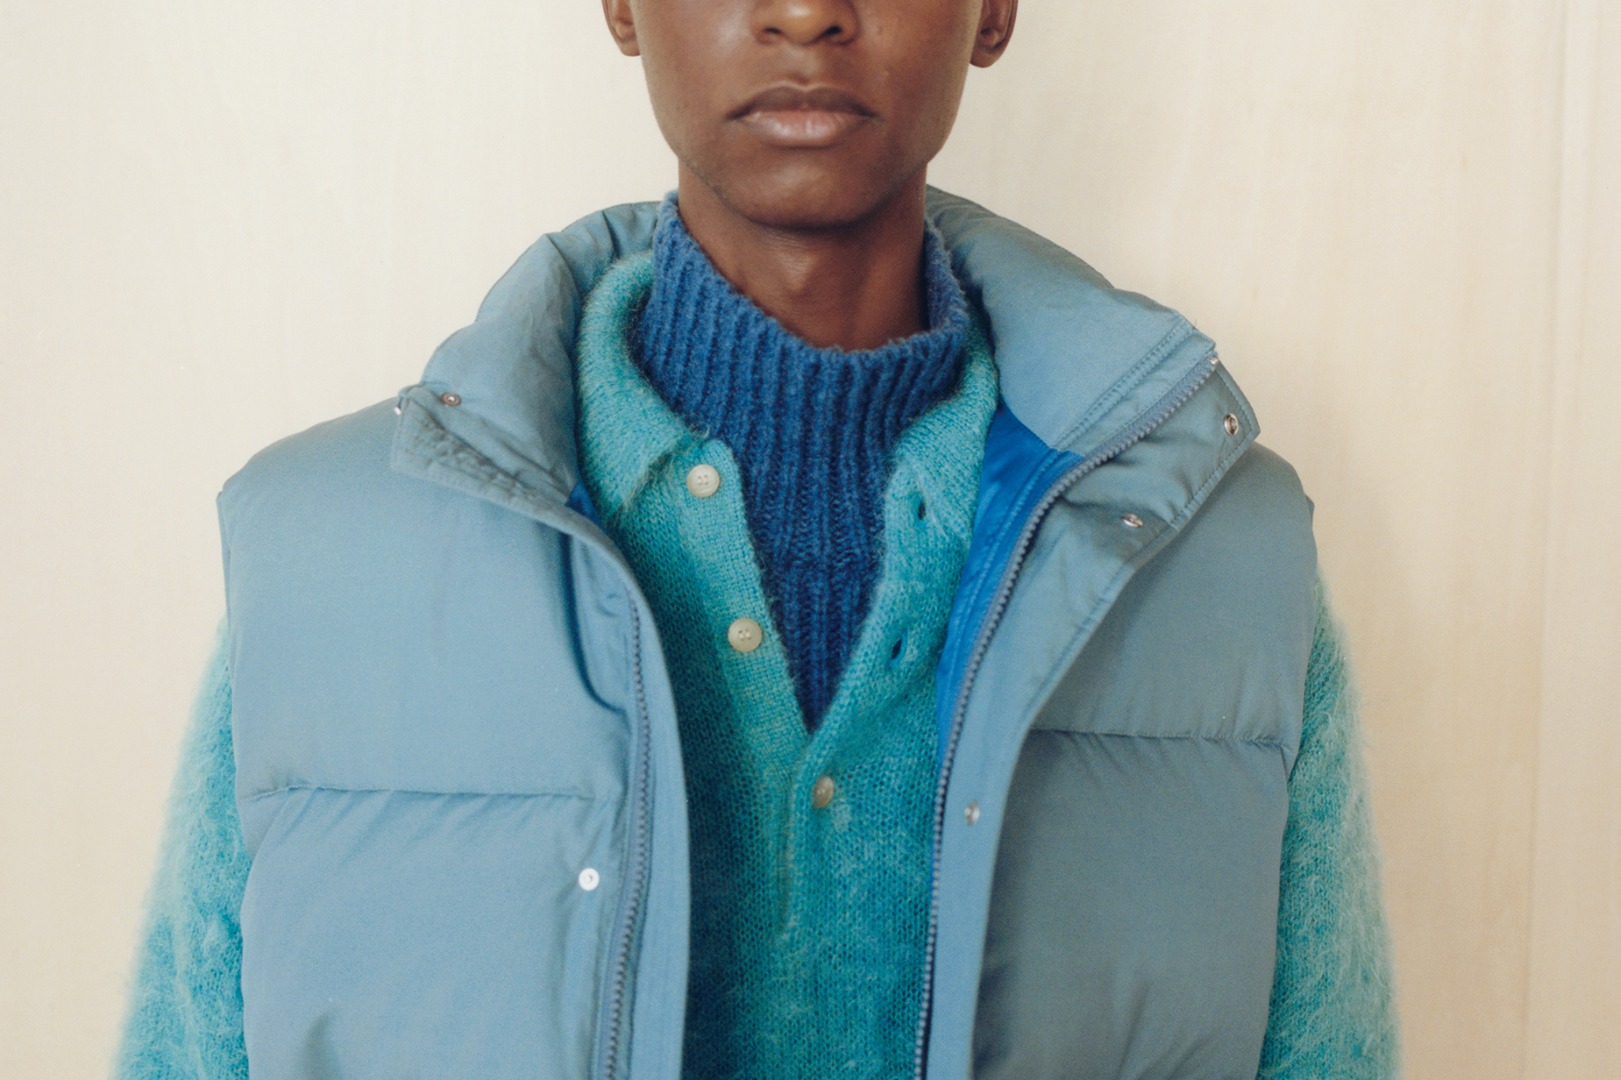 Mohamed wears Suvin High Count Cloth Down Vest in Cerulean Blue, Brushed Super Kid Mohair Knit Polo in Blue